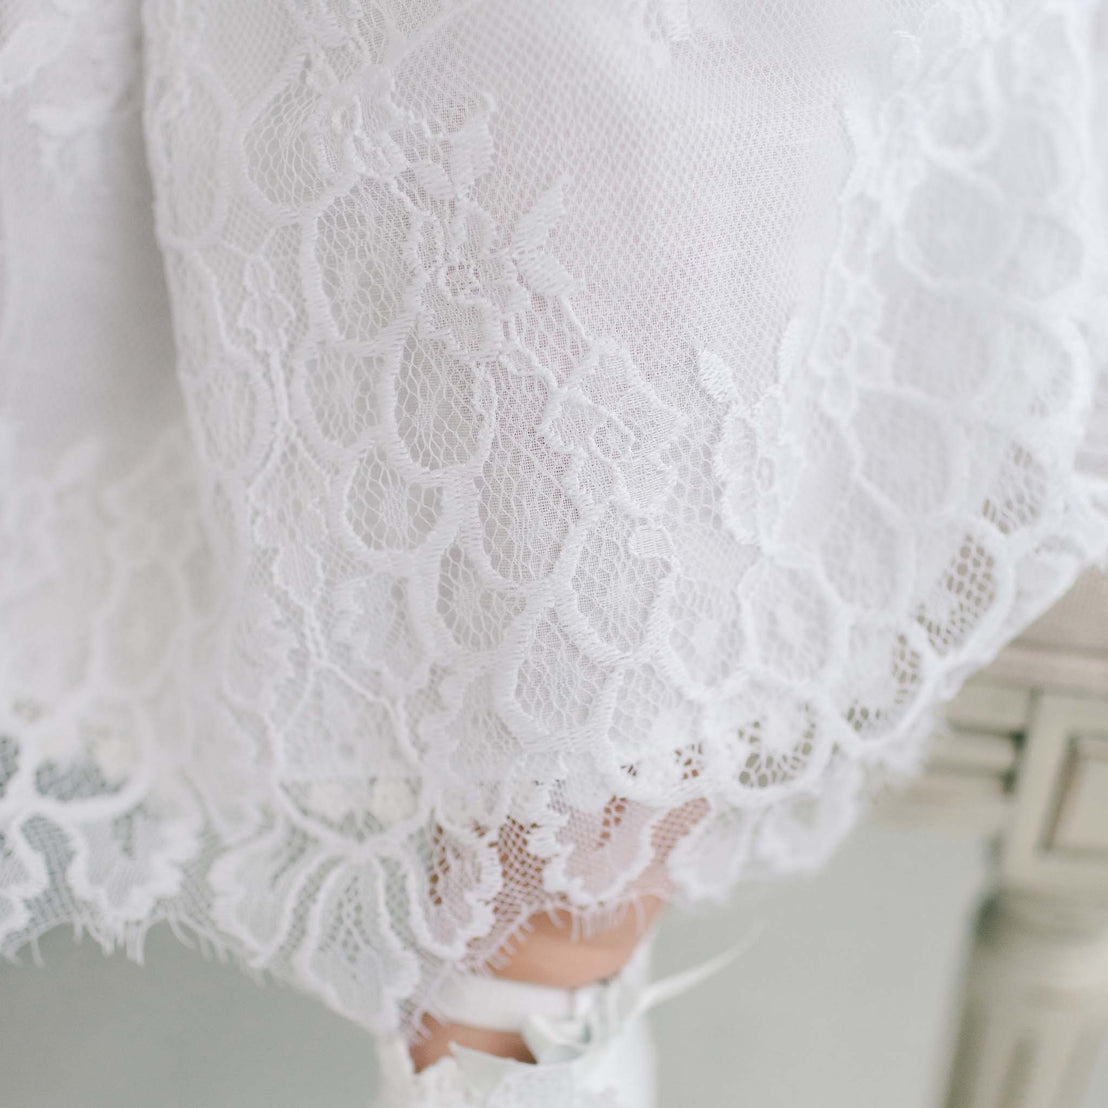 Close-up view of a bride's Olivia Christening Gown with delicate floral patterns, highlighting intricate craftsmanship and heirloom elegance.